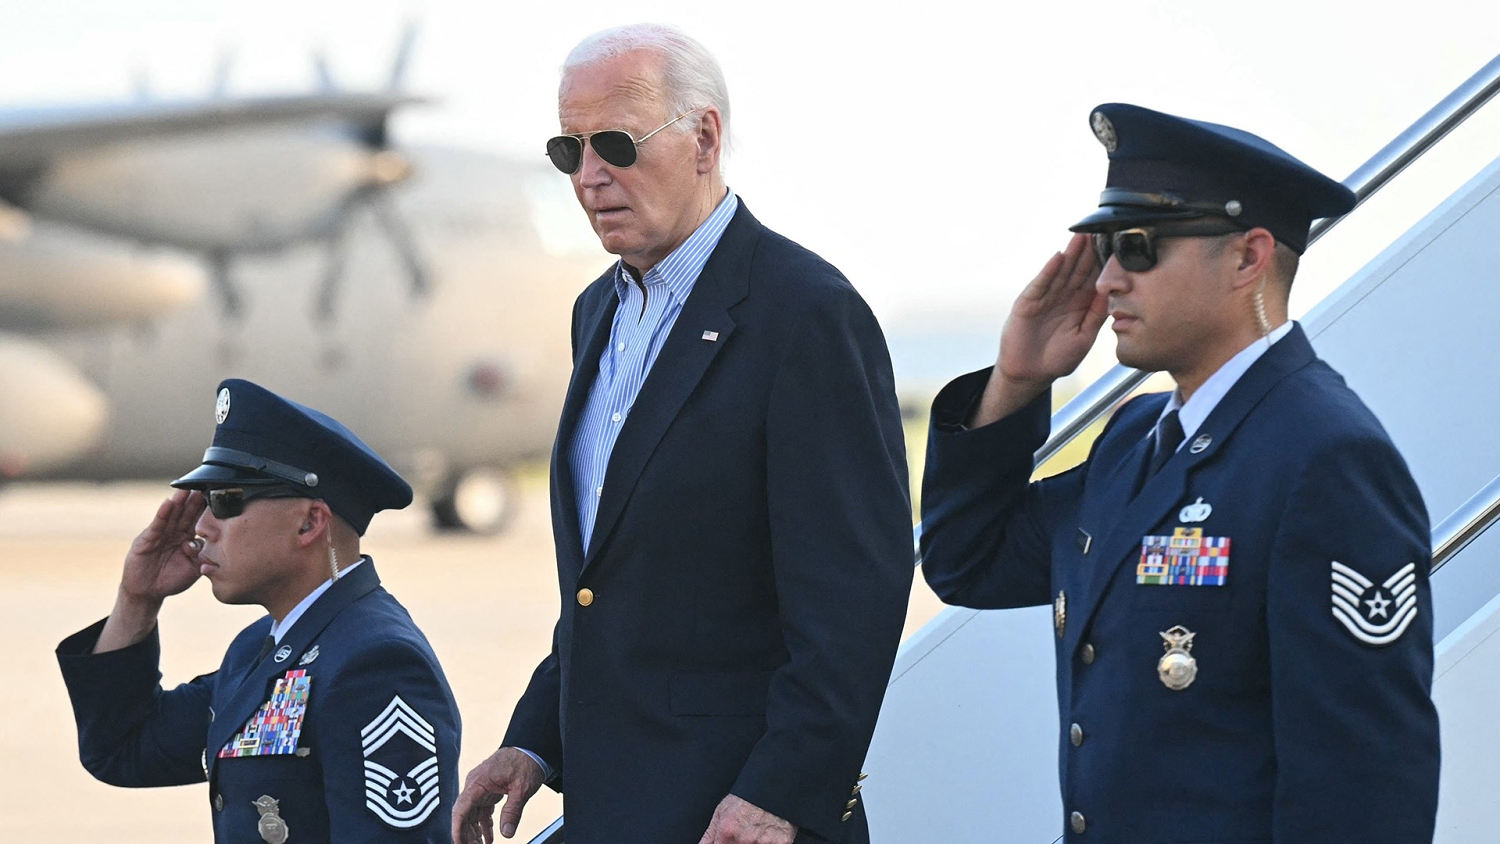 Biden to campaign in Pennsylvania amid growing calls to leave race